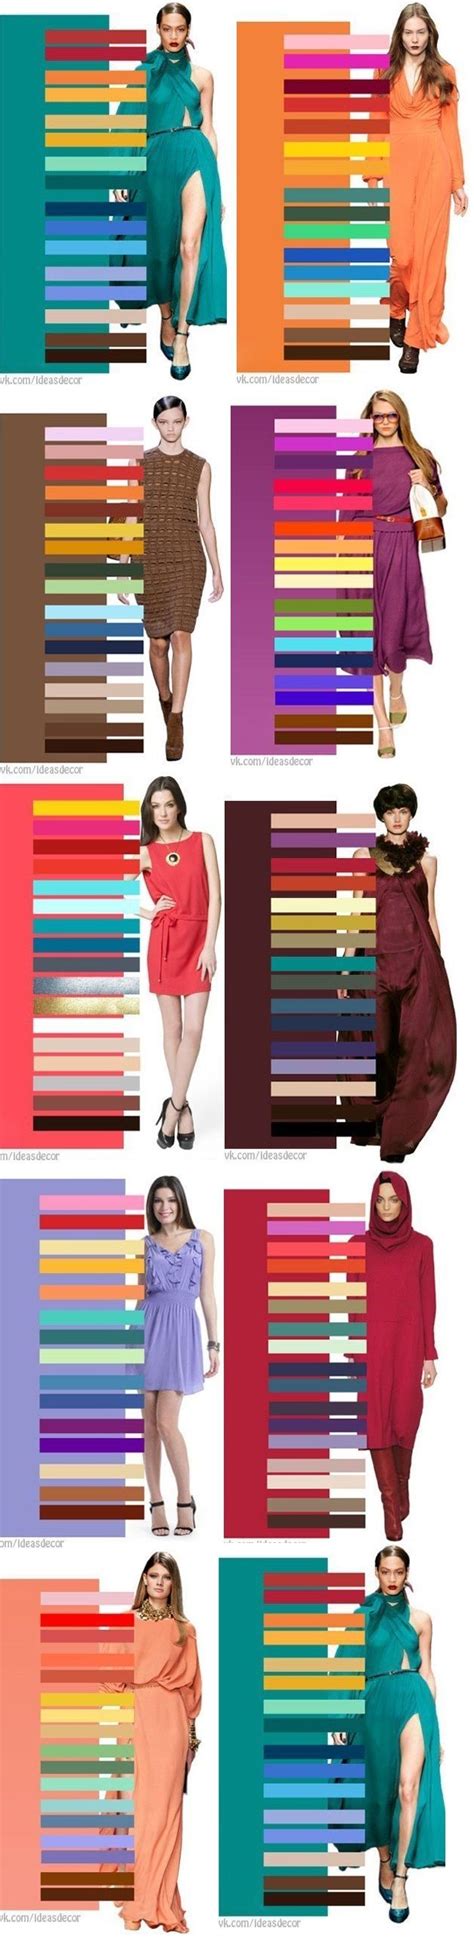 great color combinations interesting and helpful for those like me who are fashion challenged